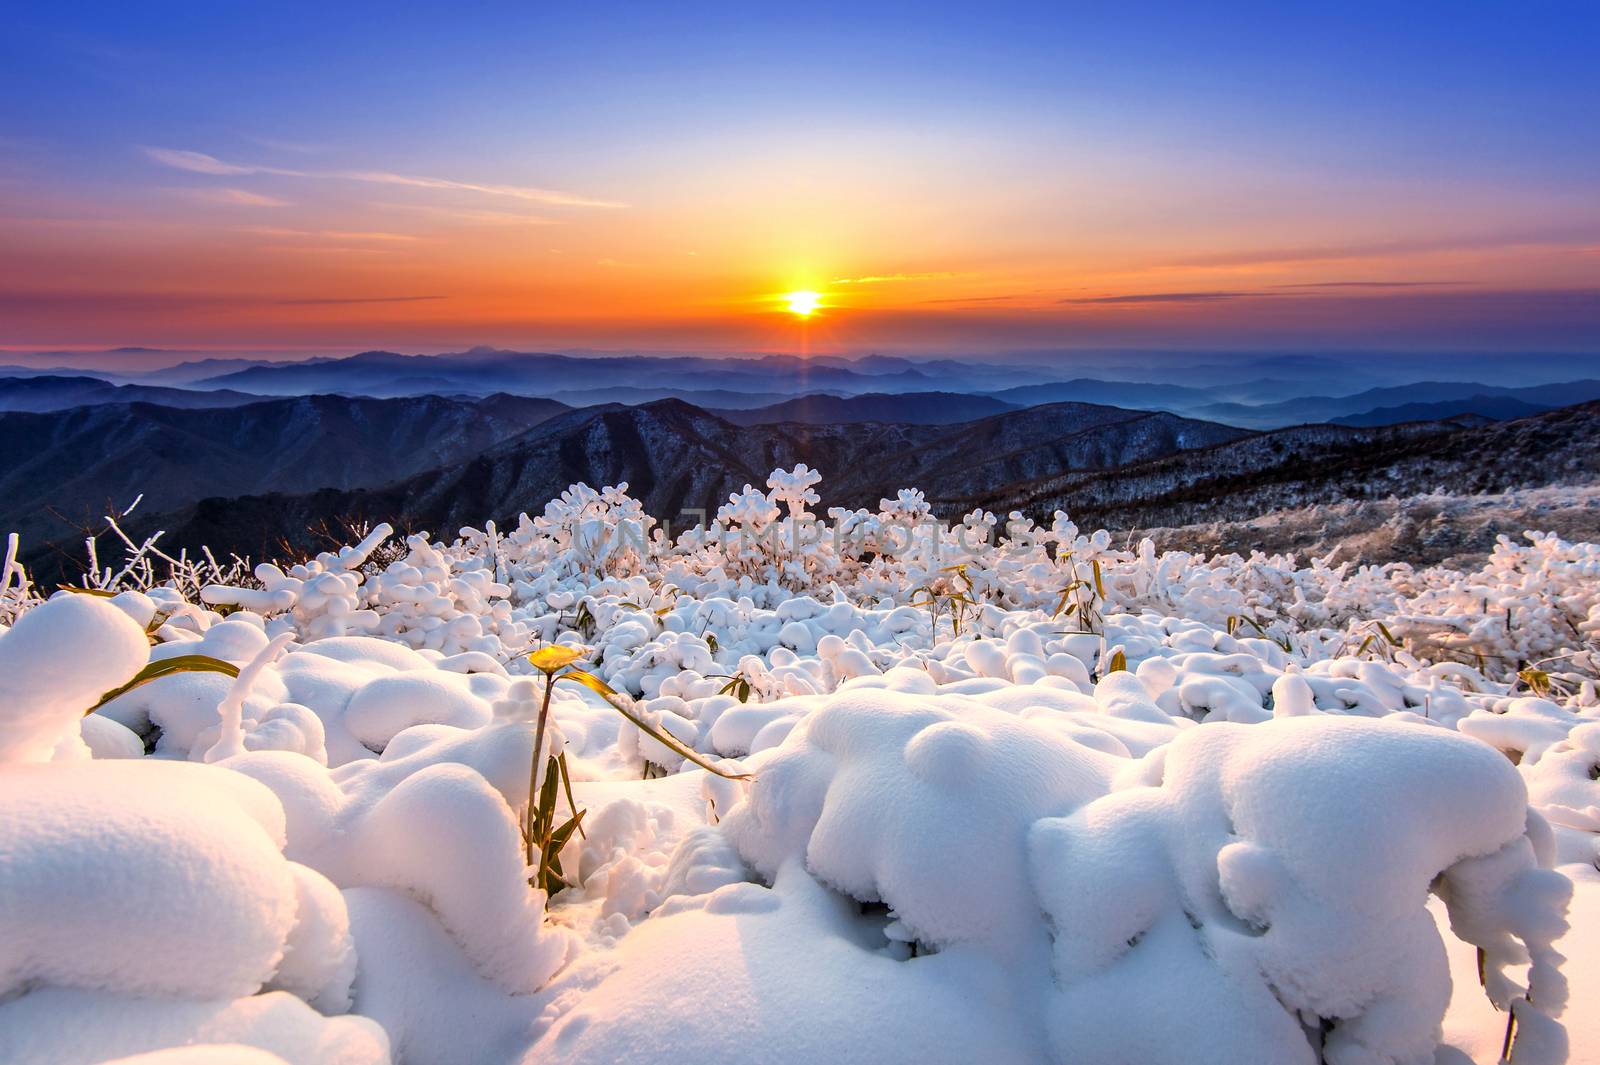 Beautiful sunrise on Deogyusan mountains covered with snow in winter,South Korea.